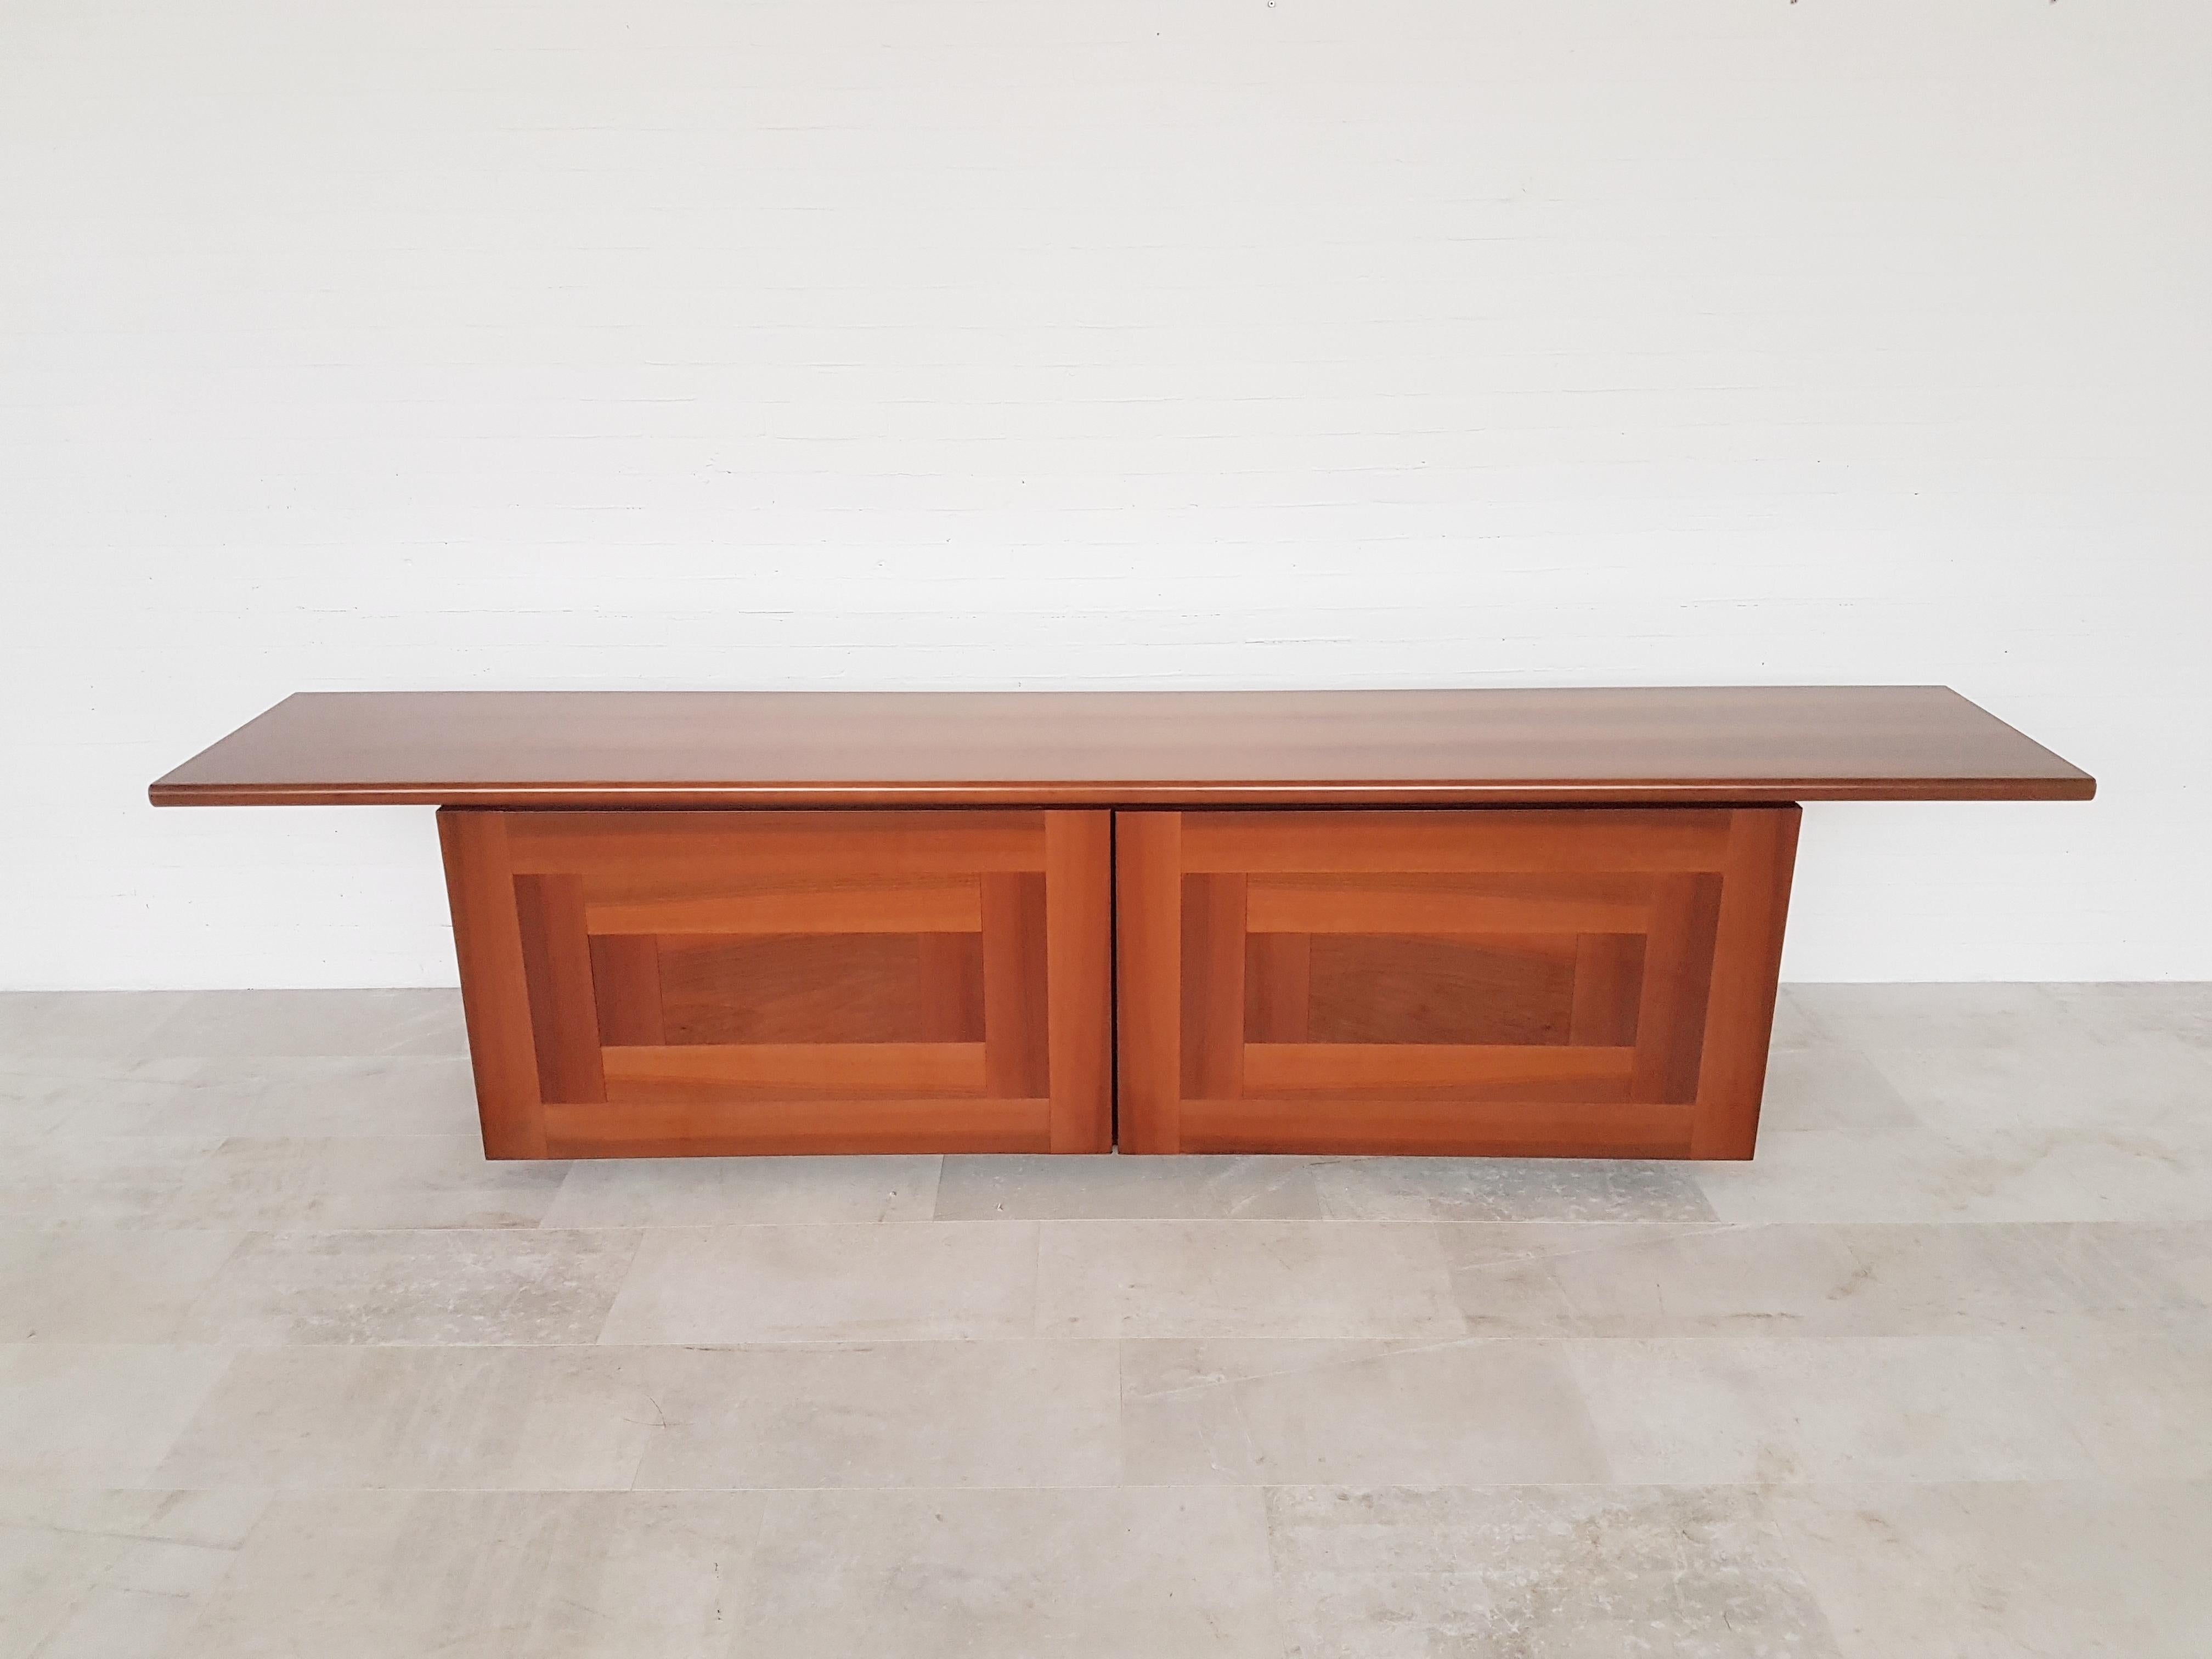 Postmodern credenza titled “Sheraton”, a design by Giotto Stoppino and Lodovico Acerbis for Acerbis International. A very wide top in glossy cherry; two sliding doors hide plenty storage possibilities and also open up completely. Winner of the